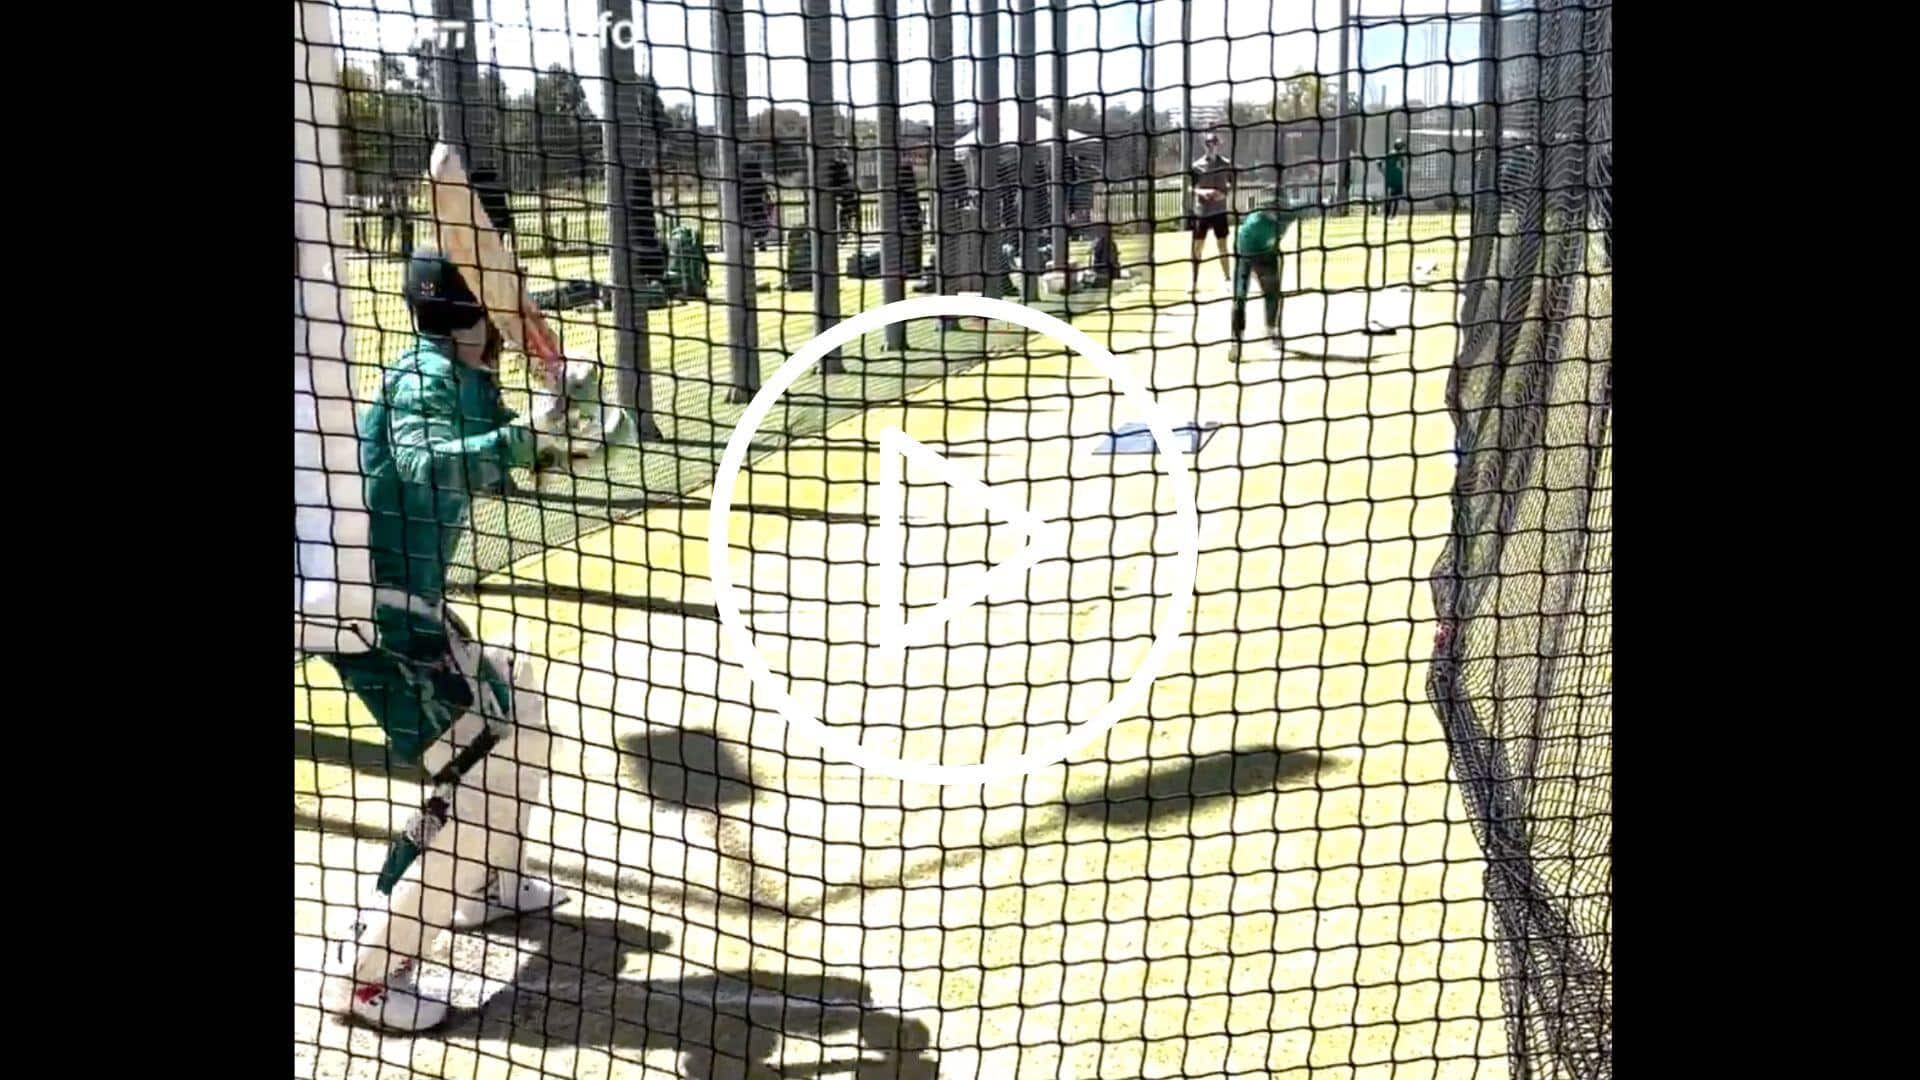 [Watch] Babar Azam Put In The Hard Yards In Nets Ahead Of PAK vs AUS 1st Test